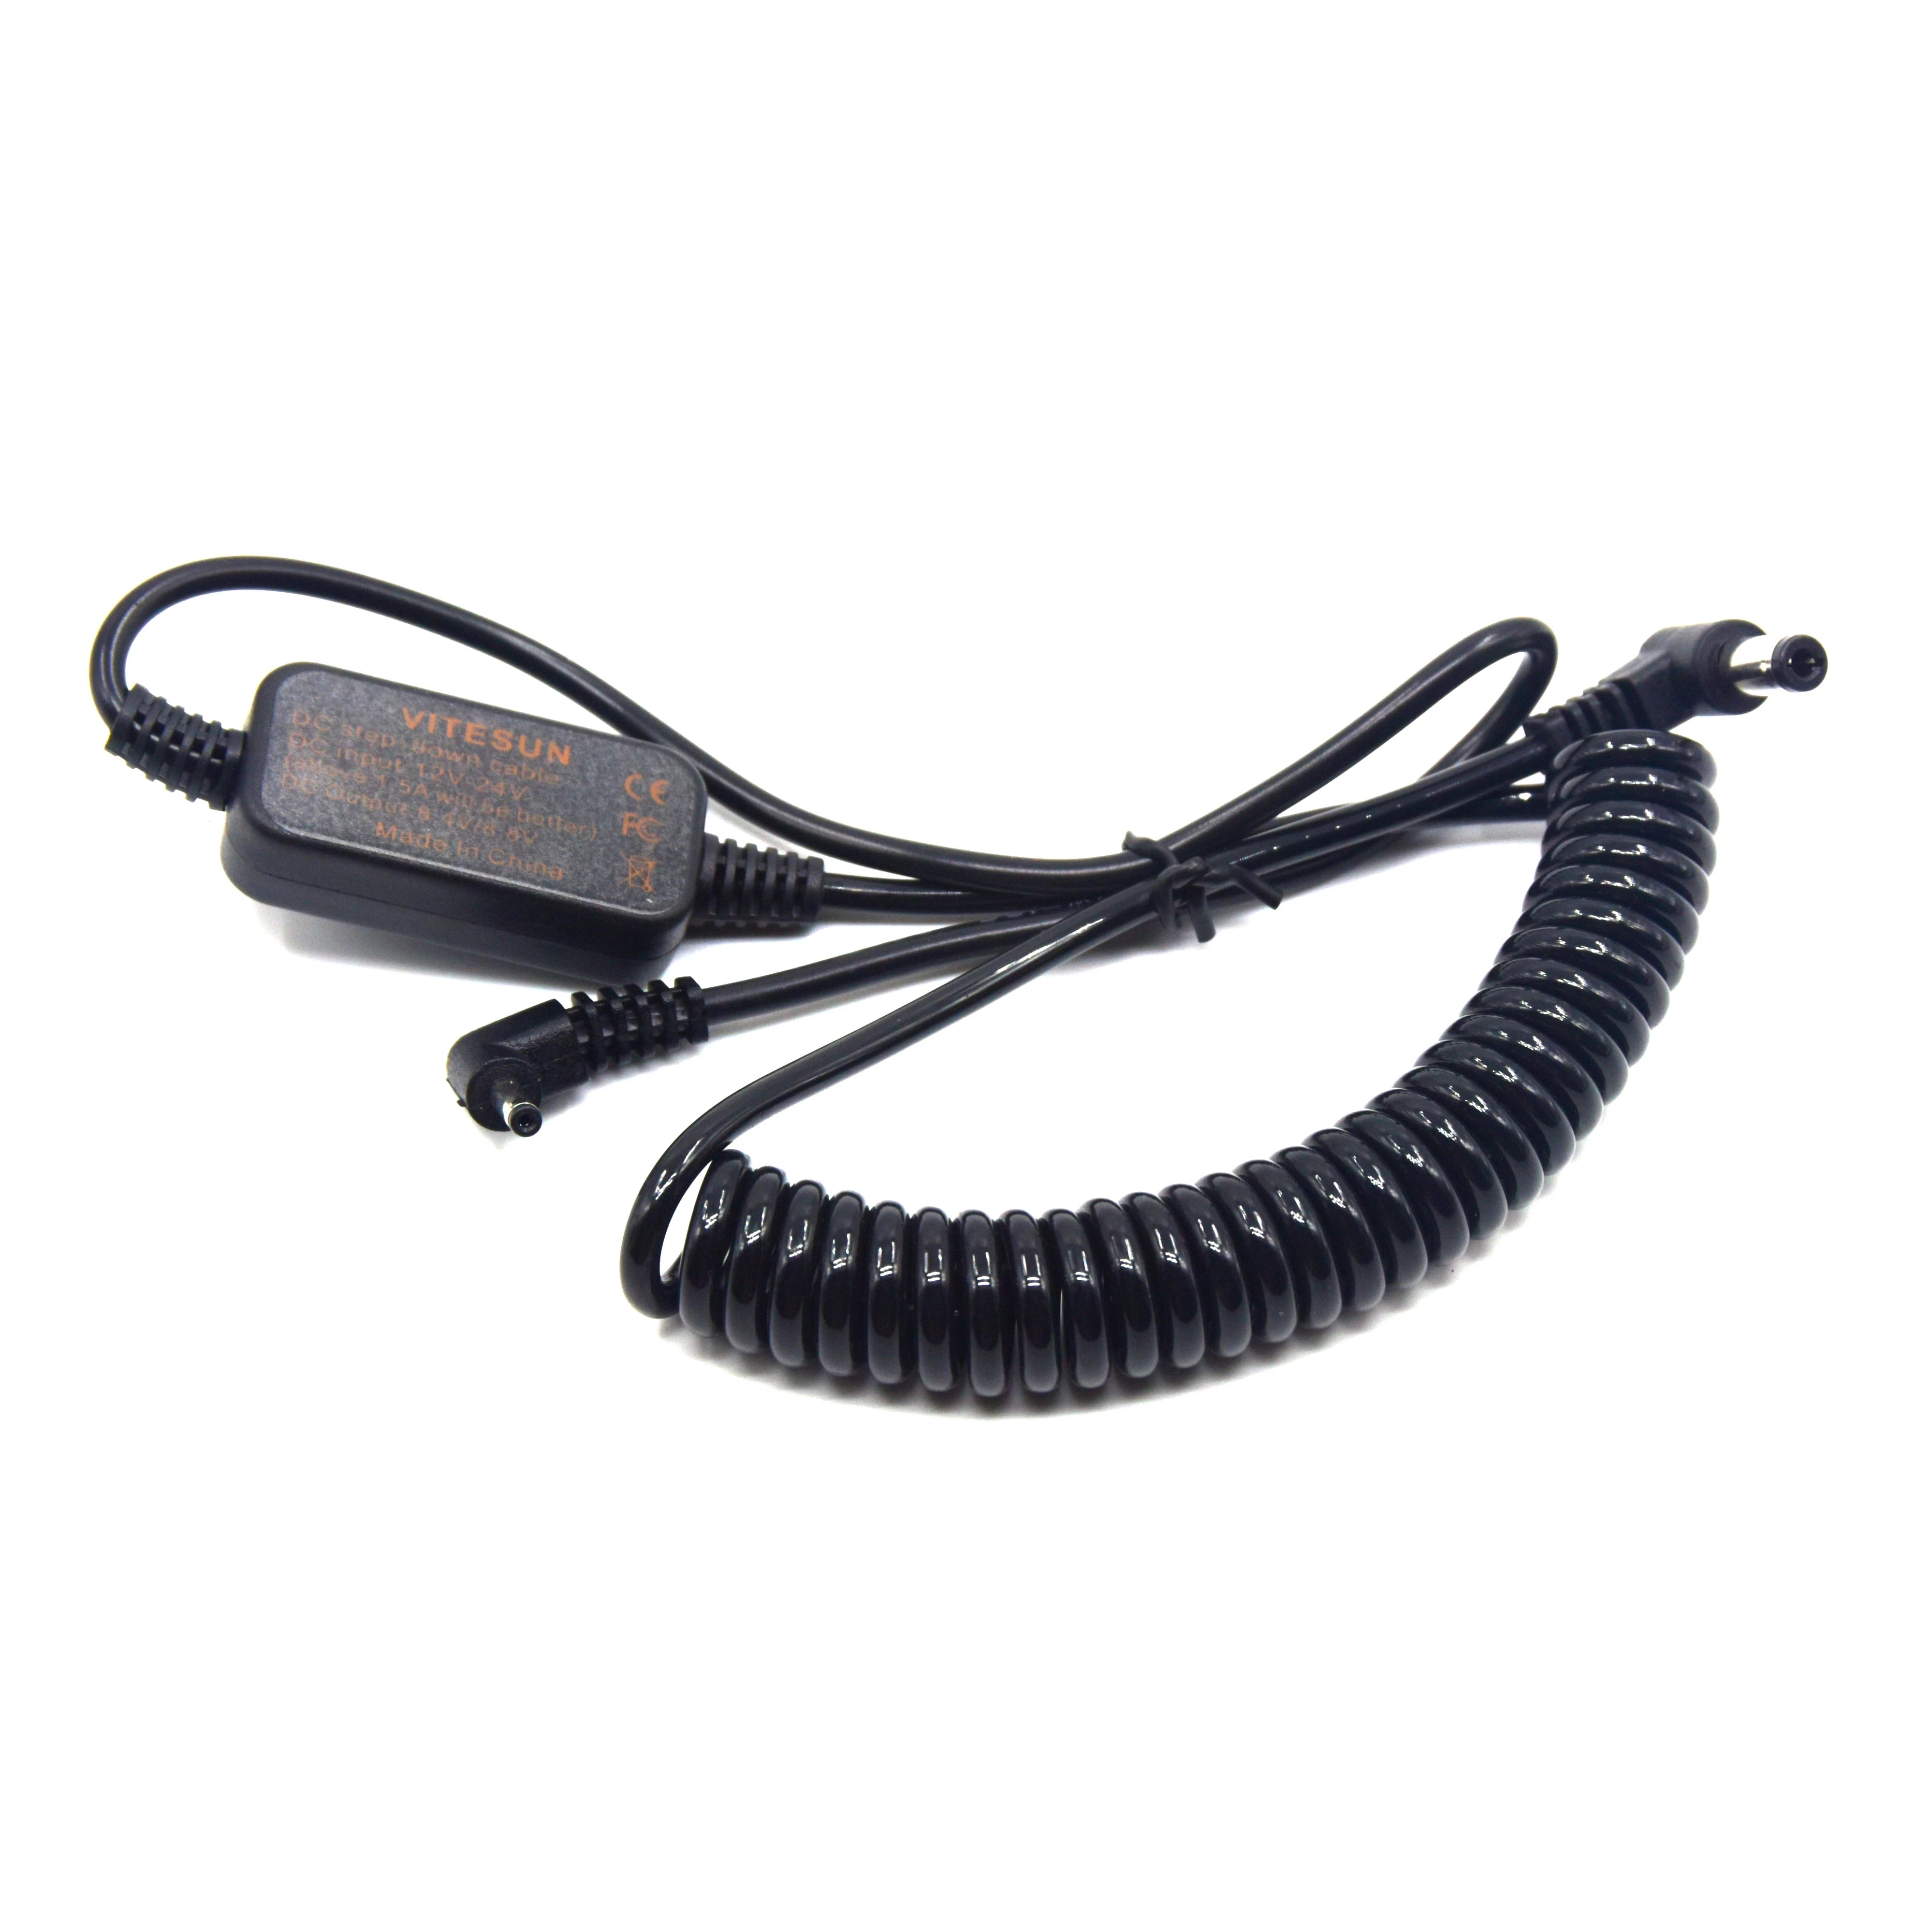 

CA-PS700 DC Step-Down Cable 12V-24V Spring Male 5.5*2.5mm Fit Camera For Canon DR-E8 DR-E10 DR-E12 DR-E15 DR-E17 DR-80 Coupler